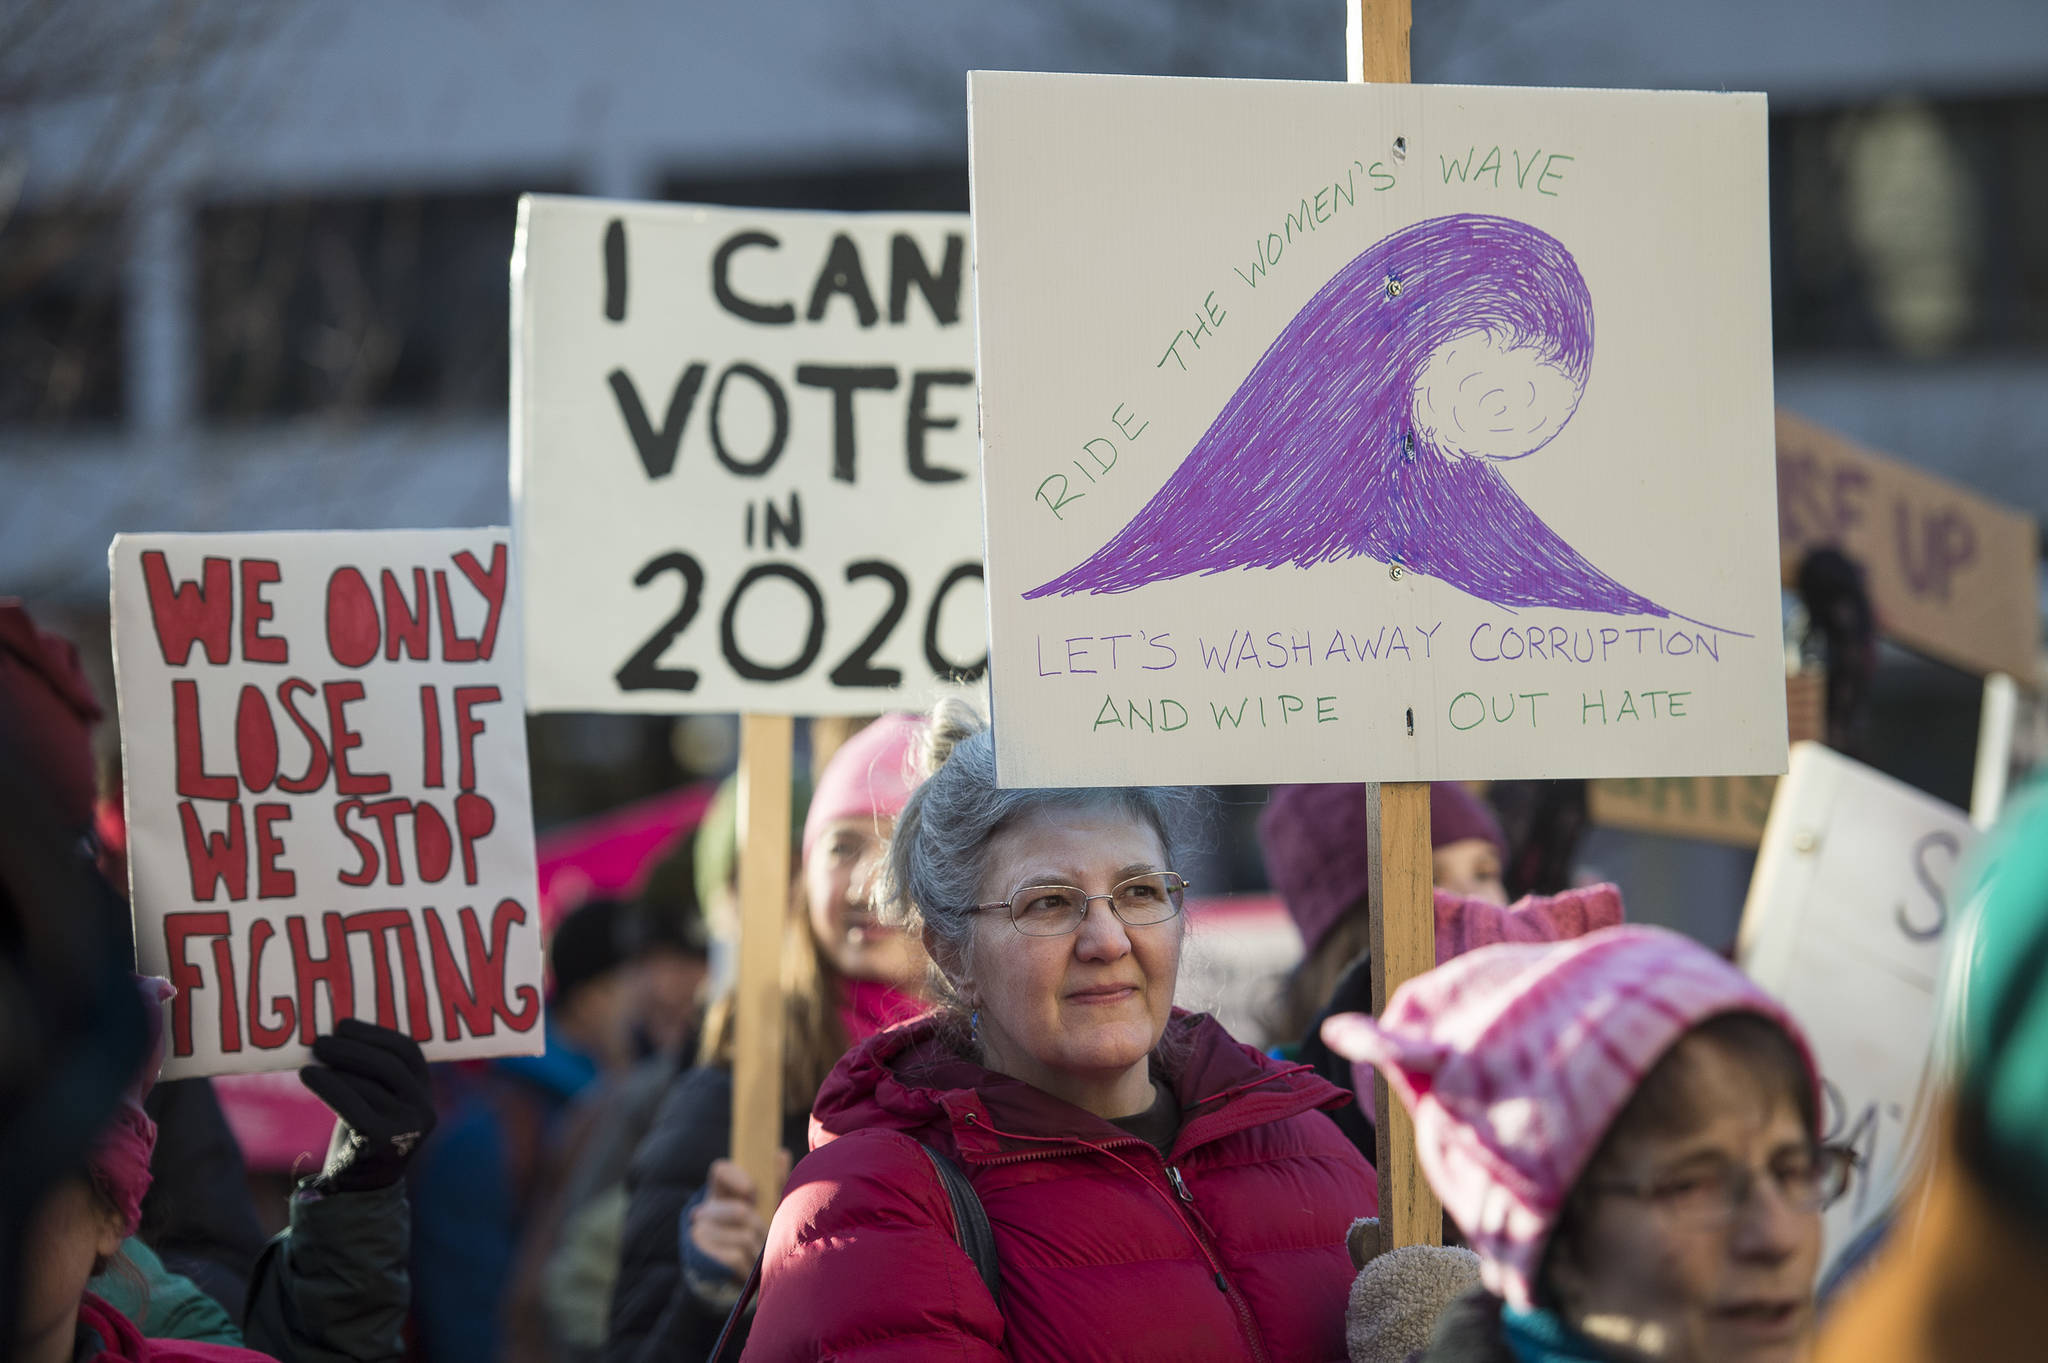 City and Borough of Juneau Assembly member Michelle Bonnet Hale holds a sign at the Women’s March on Juneau in front of the Alaska State Capitol on Saturday, Jan. 19, 2019. (Michael Penn | Juneau Empire)